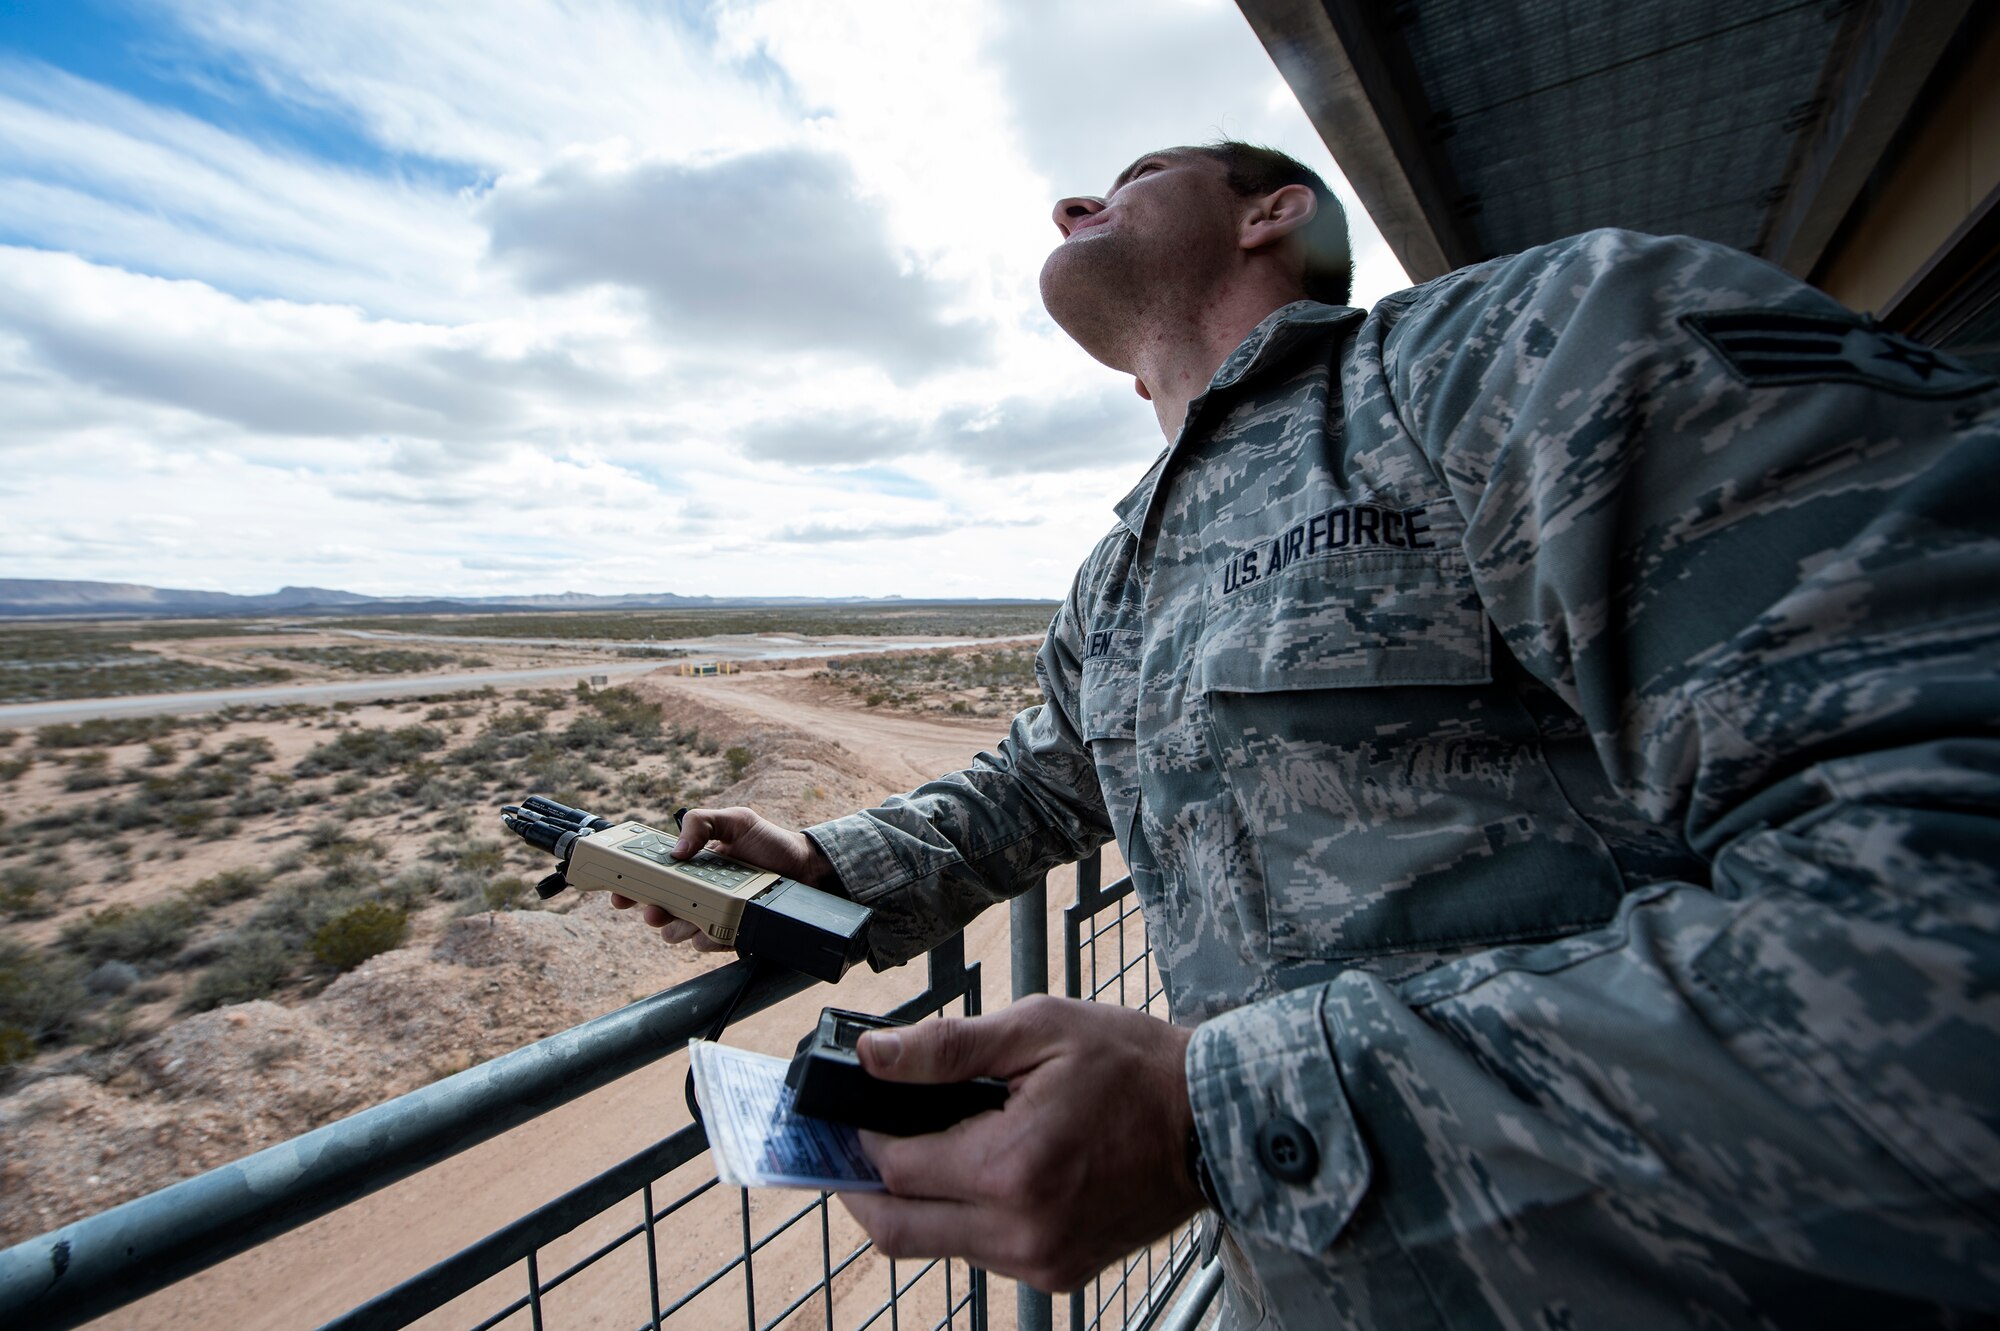 U.S. Air Force Senior Airman Jacob Mullen, 7th Air Support Operations Squadron joint terminal attack controller, scans the sky for a B-52 Stratofortress aircraft during the joint exercise, Iron Focus, Feb. 2, 2016, at Oro Grande Training Complex at Fort Bliss, Texas. During the exercise, JTACs honed their skills controlling aircraft in preparation for deployments. (U.S. Air Force photo by Senior Airman Olivia Dominique/Released)